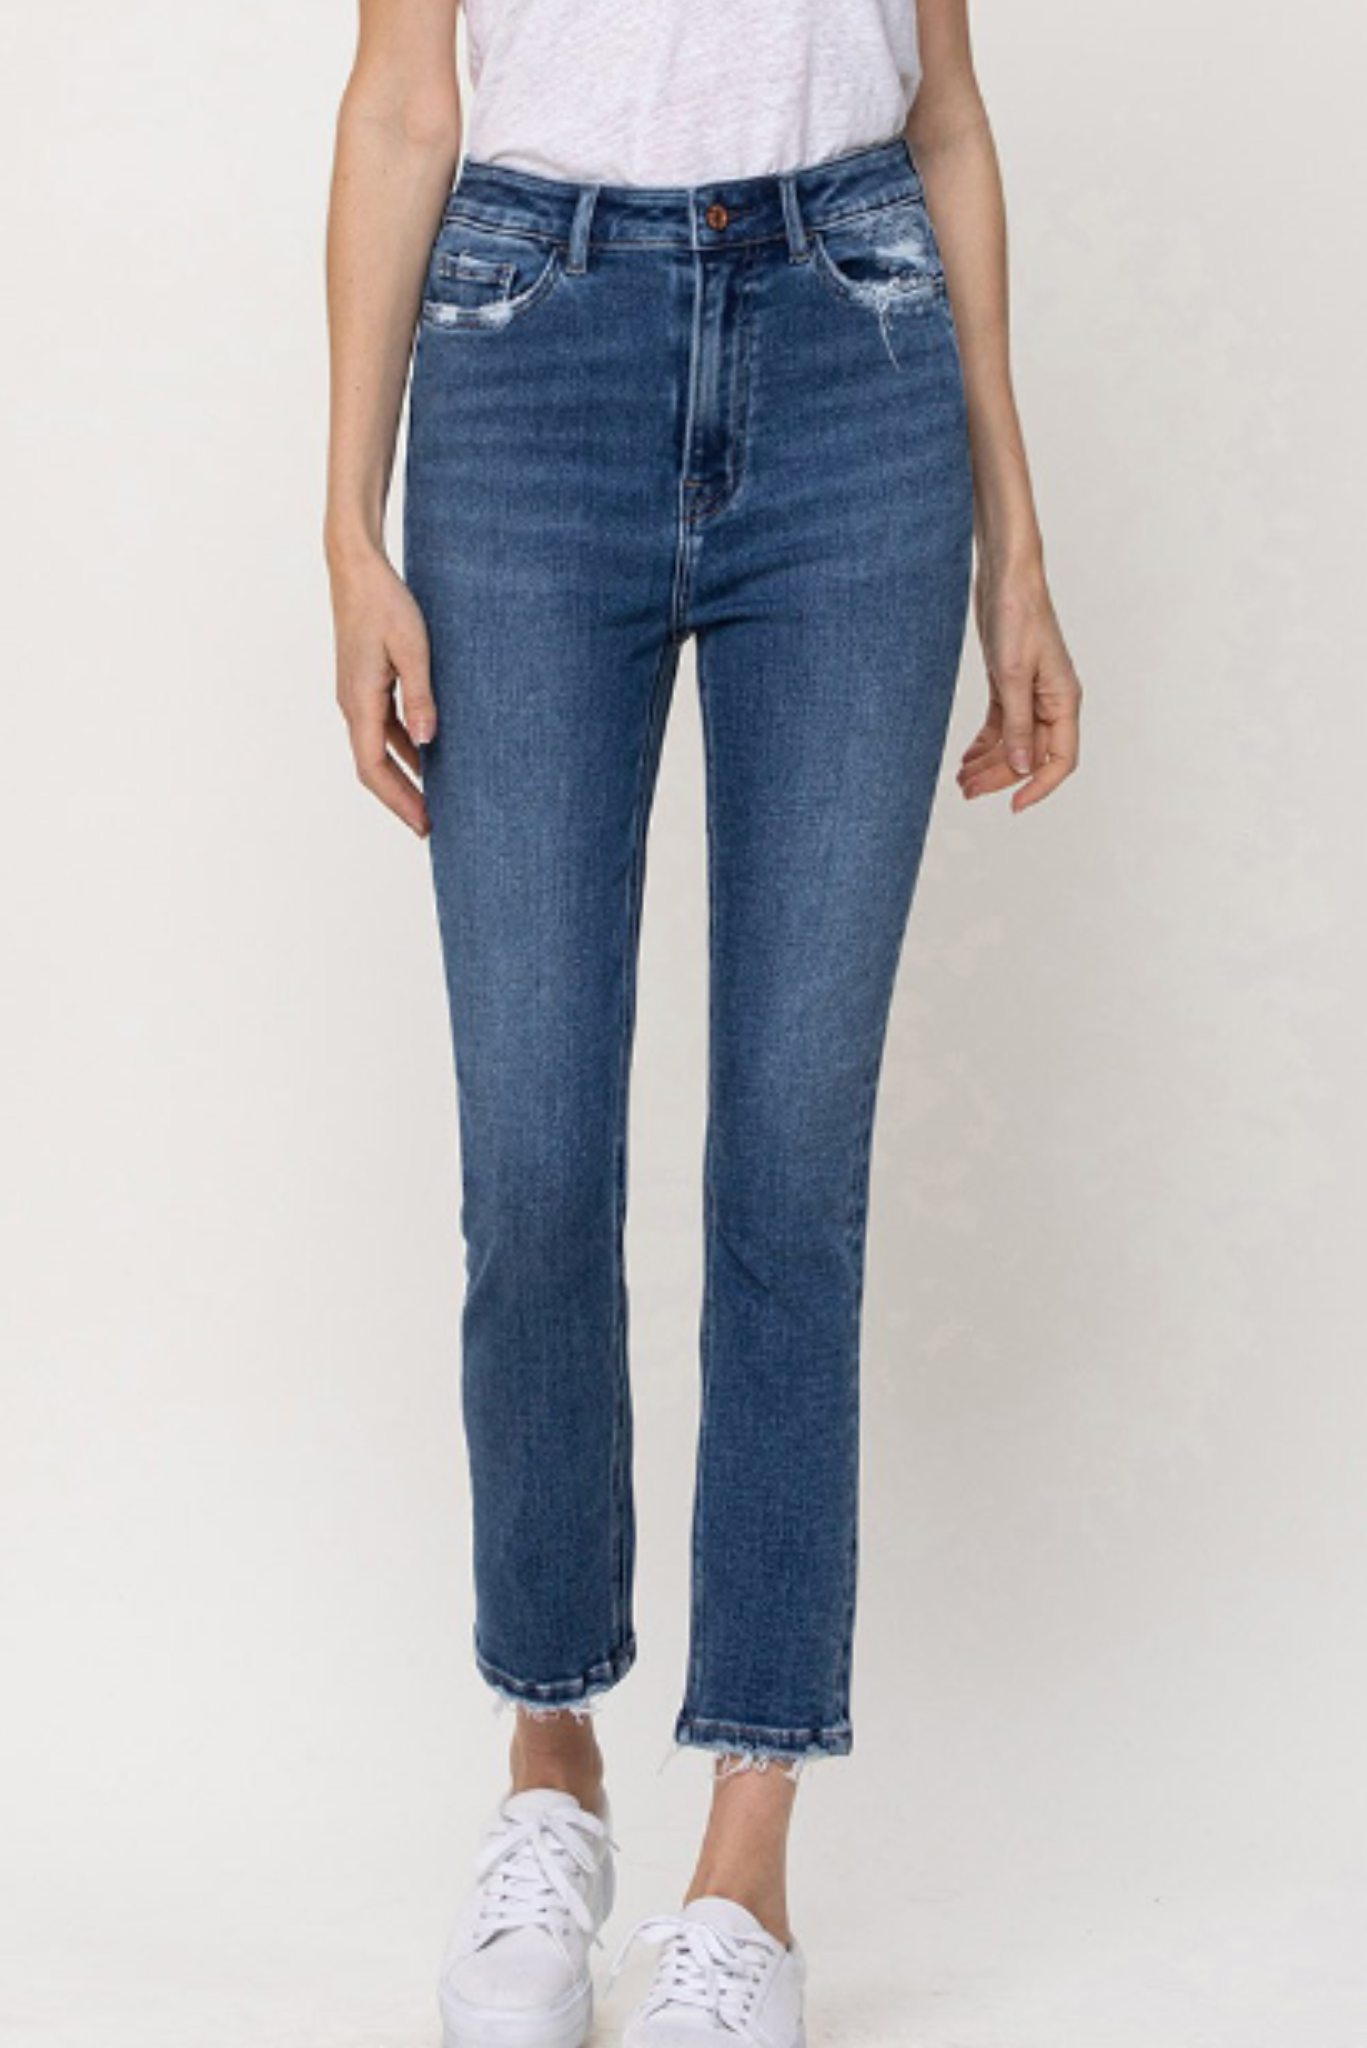 Denim High Rise Cropped Ankle Jeans, Shop Style Your Senses By Mallory Fitzsimmons